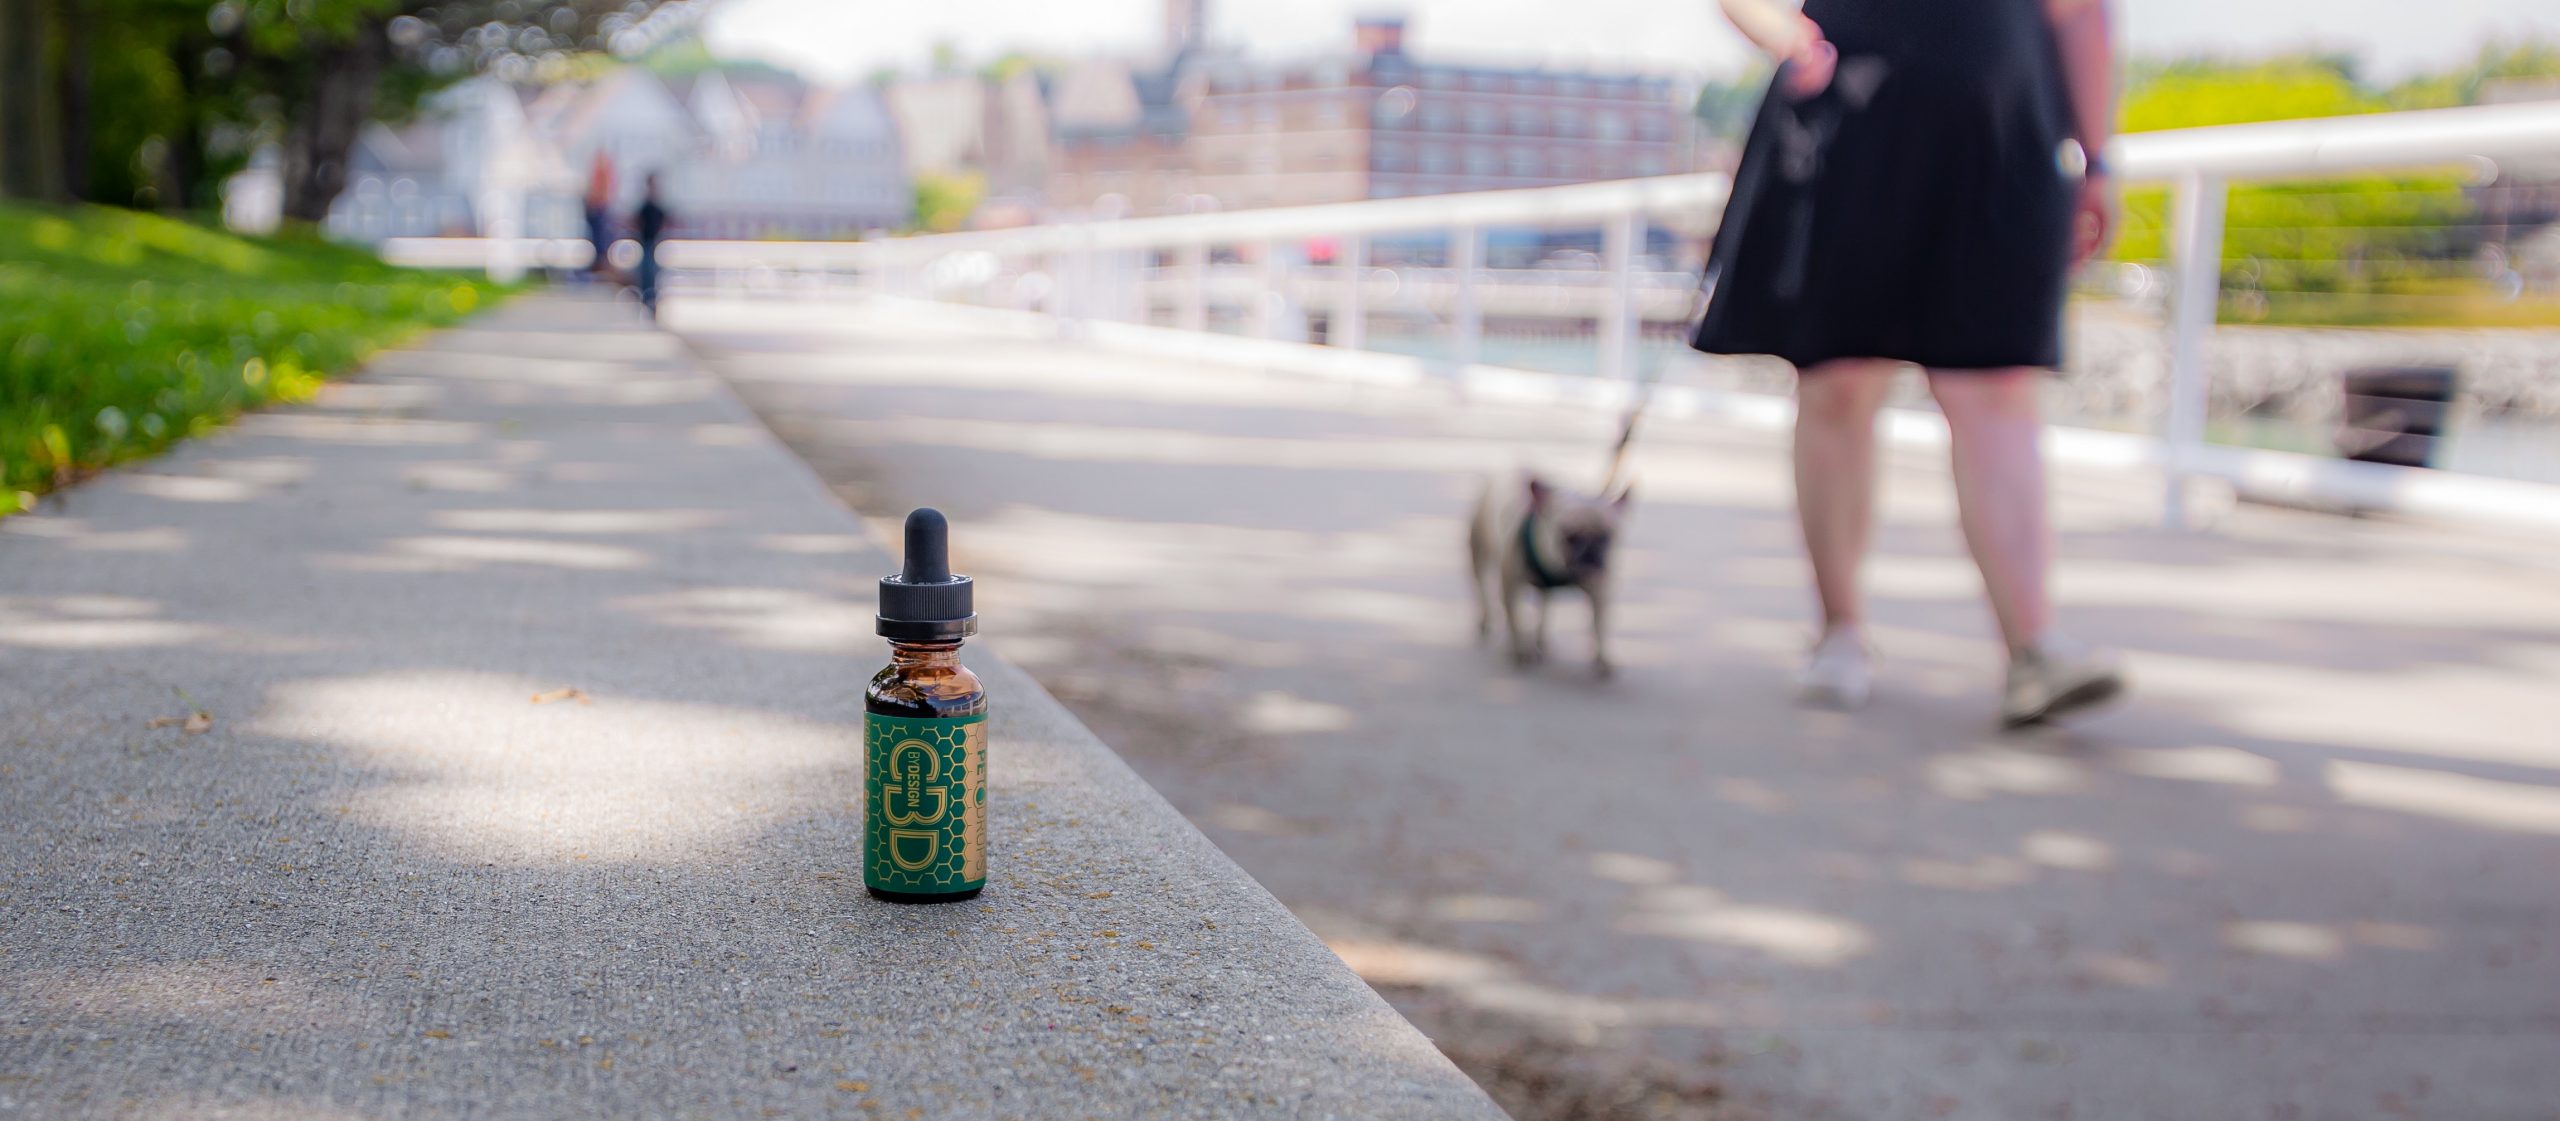 Why choose CBD by Design Pet Drops over another brand of pet CBD products?